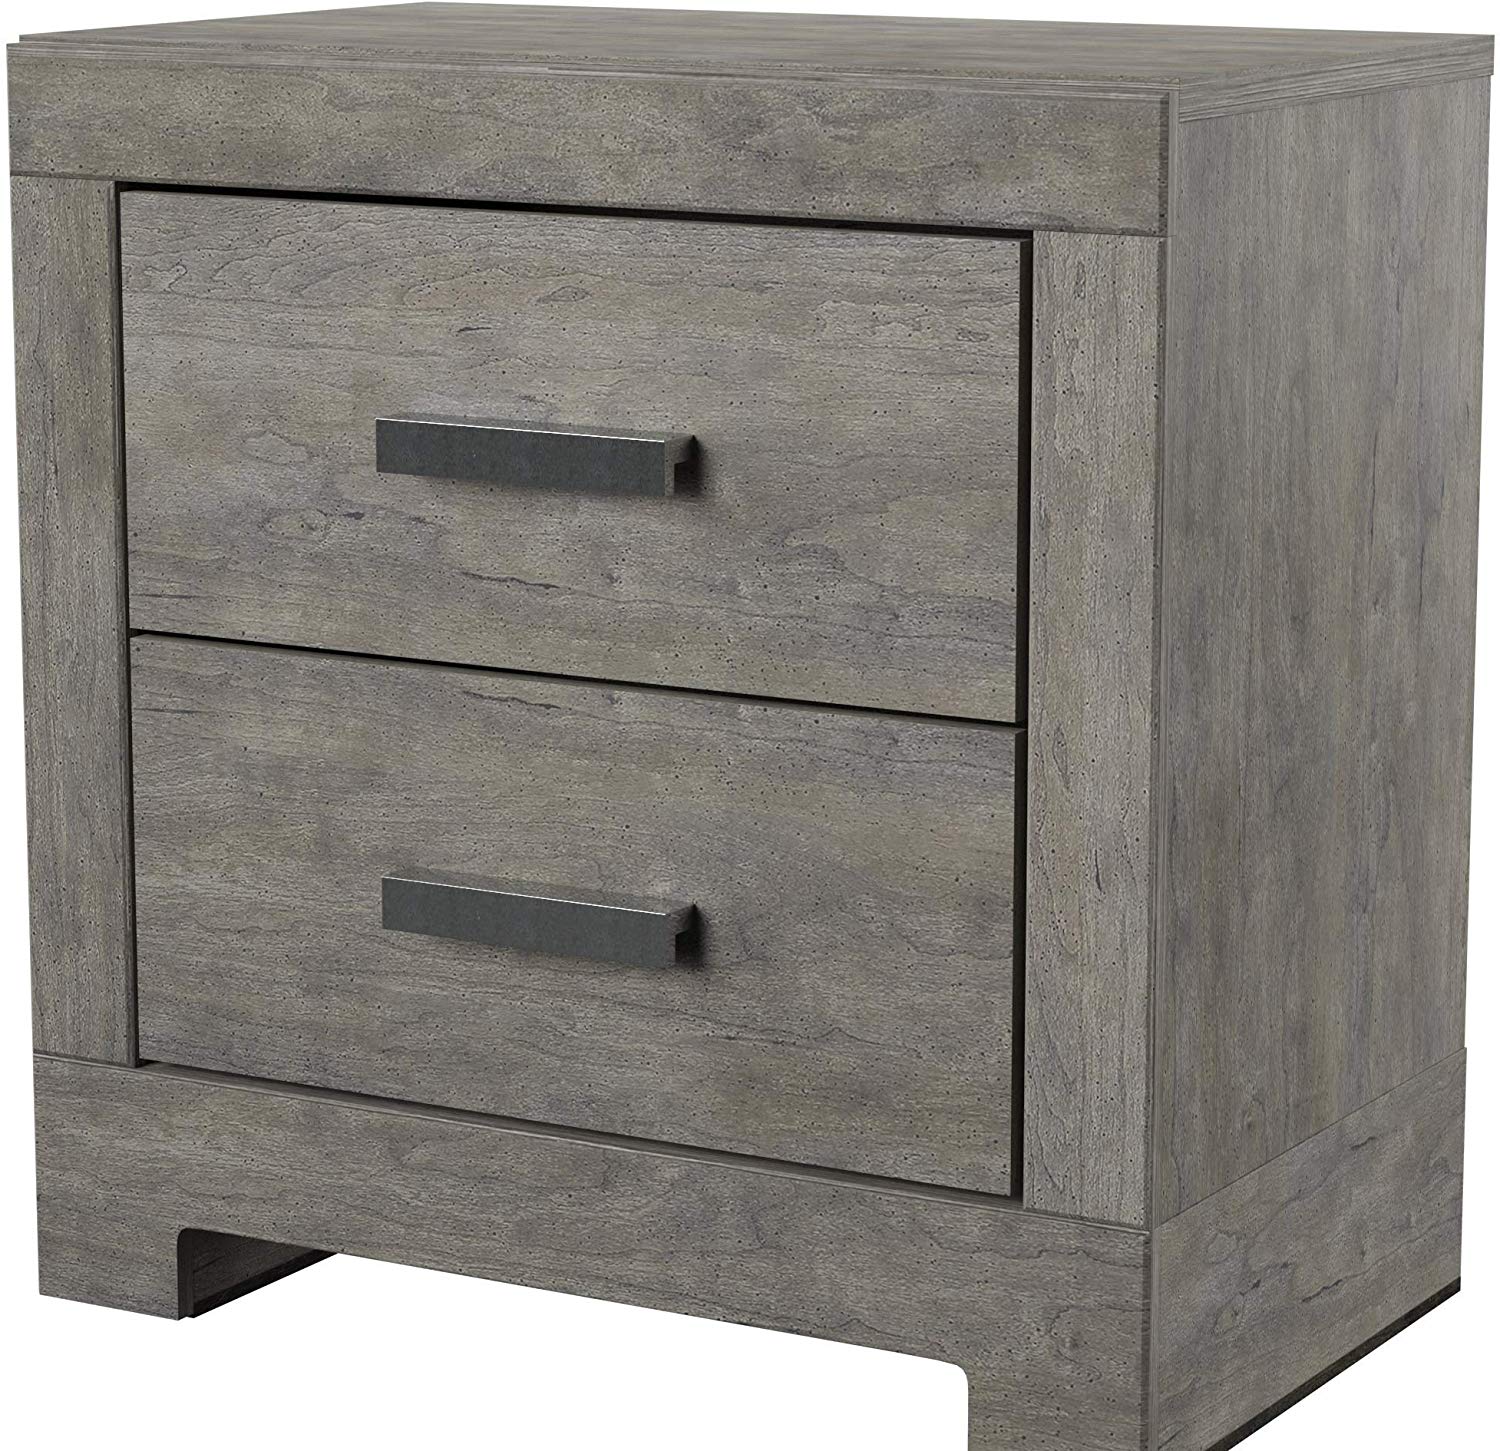 Ashley Furniture Contemporary Night Stand